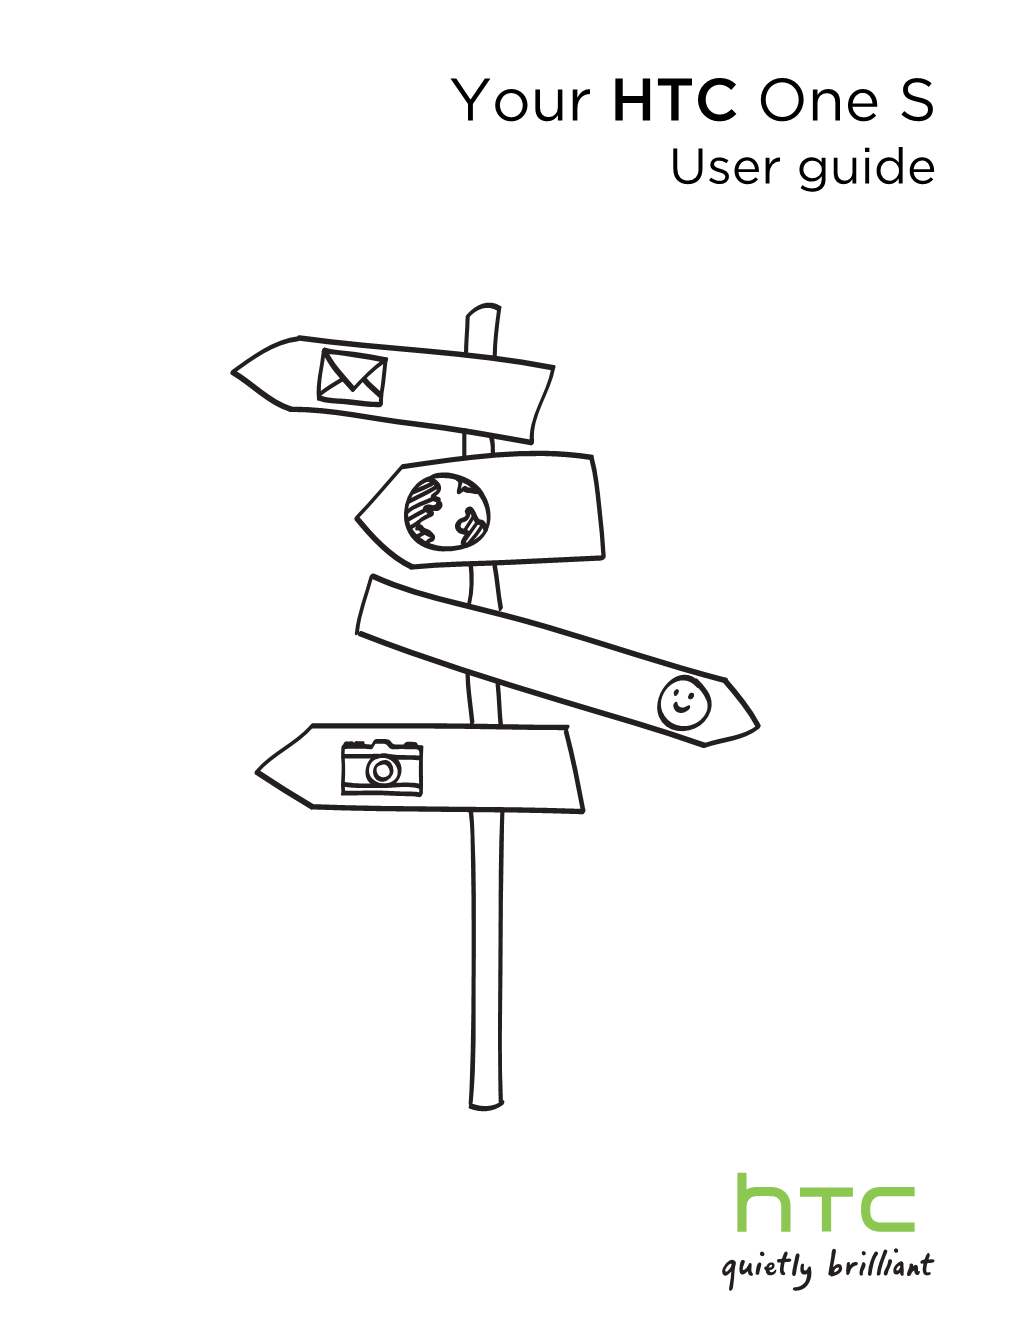 Your HTC One S User Guide 2 Contents Contents